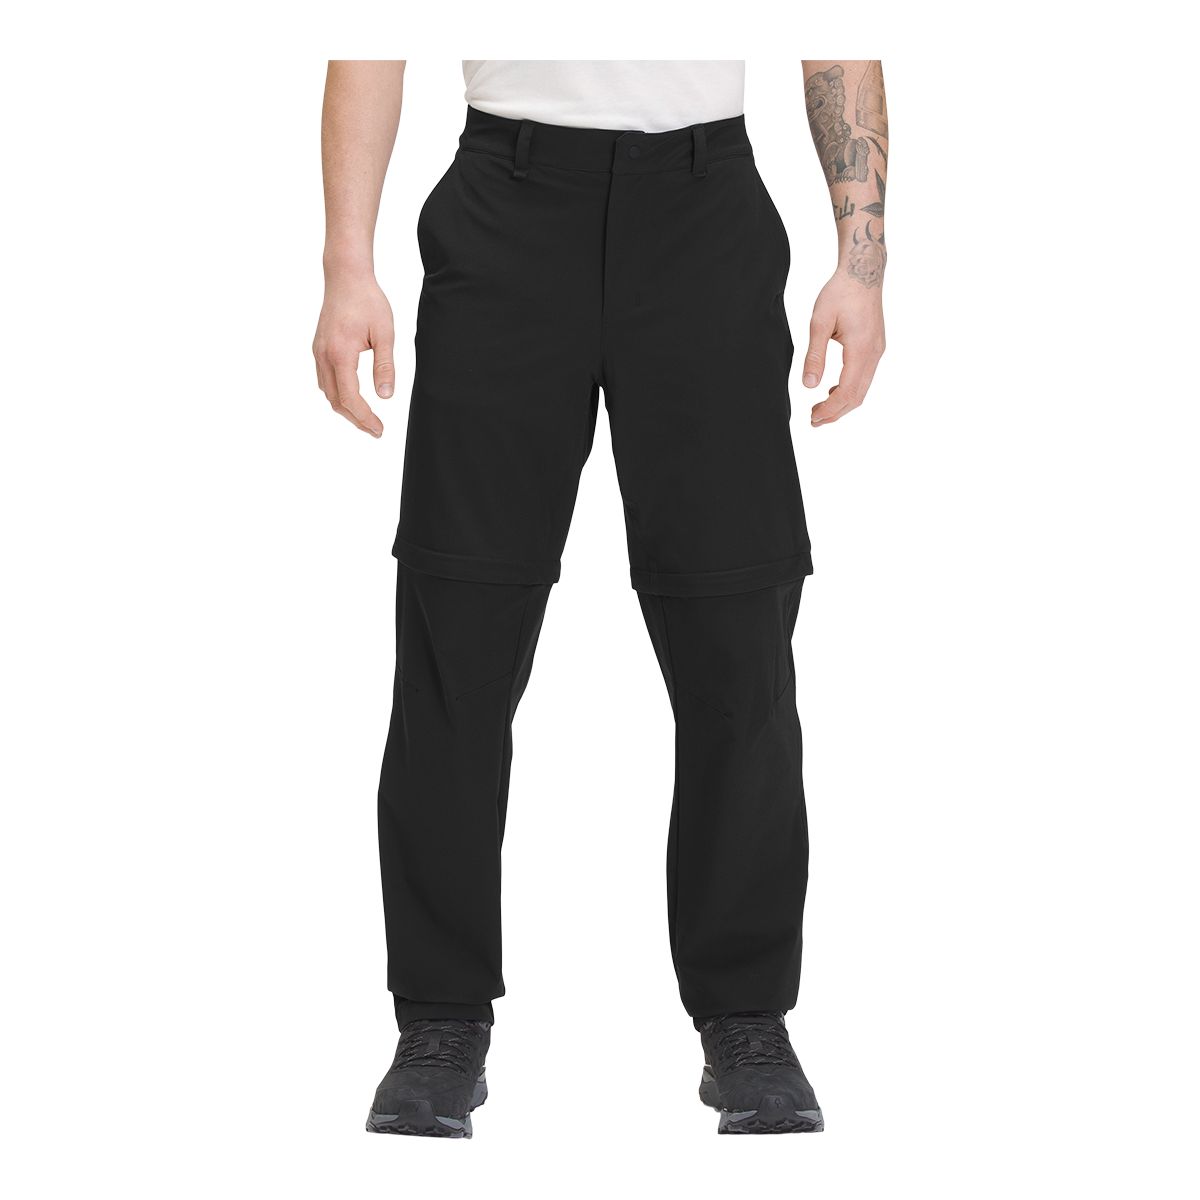 https://media-www.sportchek.ca/product/div-03-softgoods/dpt-72-casual-clothing/sdpt-01-mens/334063573/the-north-face-men-s-paramount-convertible-pants-24c38a13-fe8d-4a92-97e2-6c938745e13a-jpgrendition.jpg